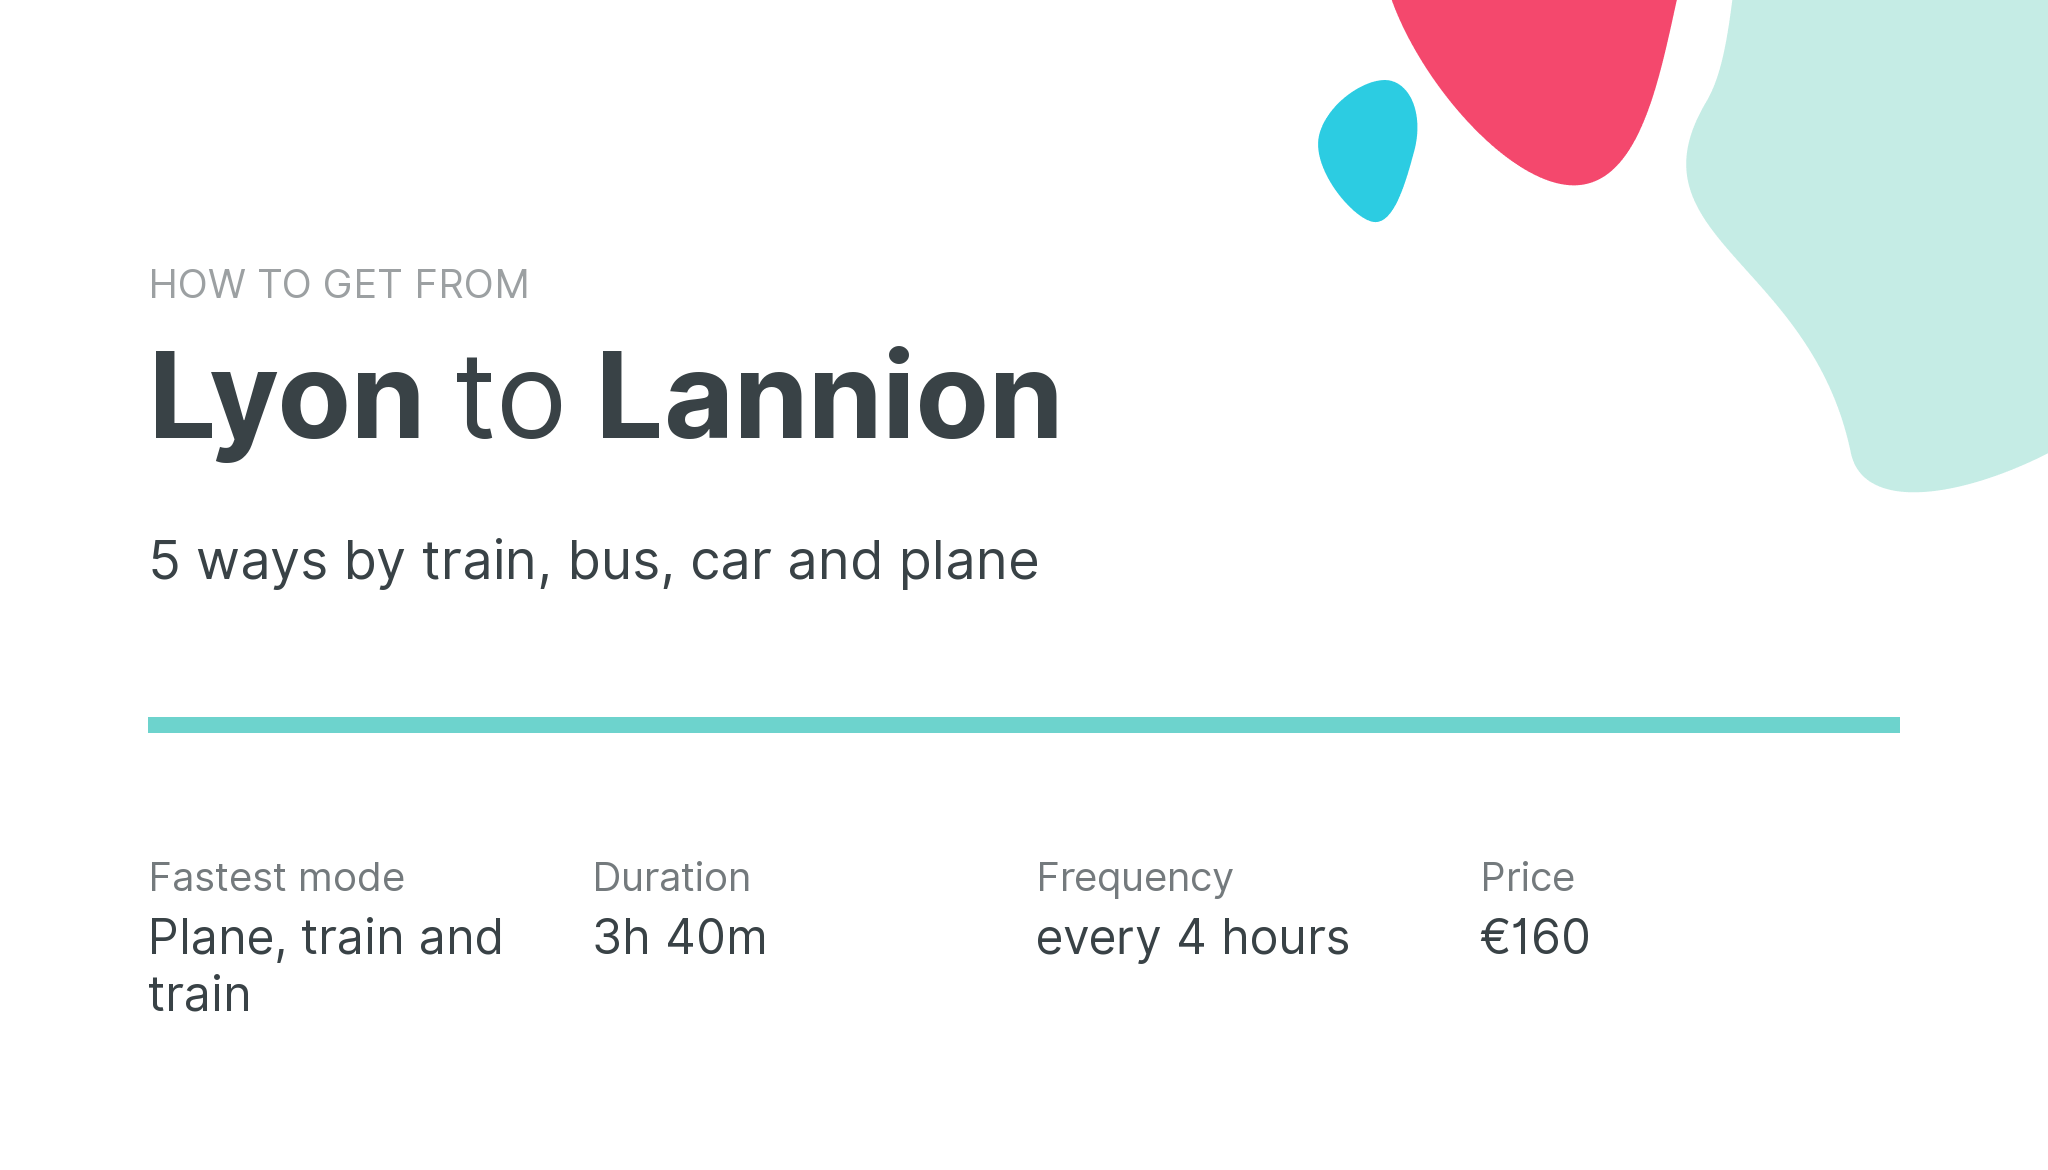 How do I get from Lyon to Lannion